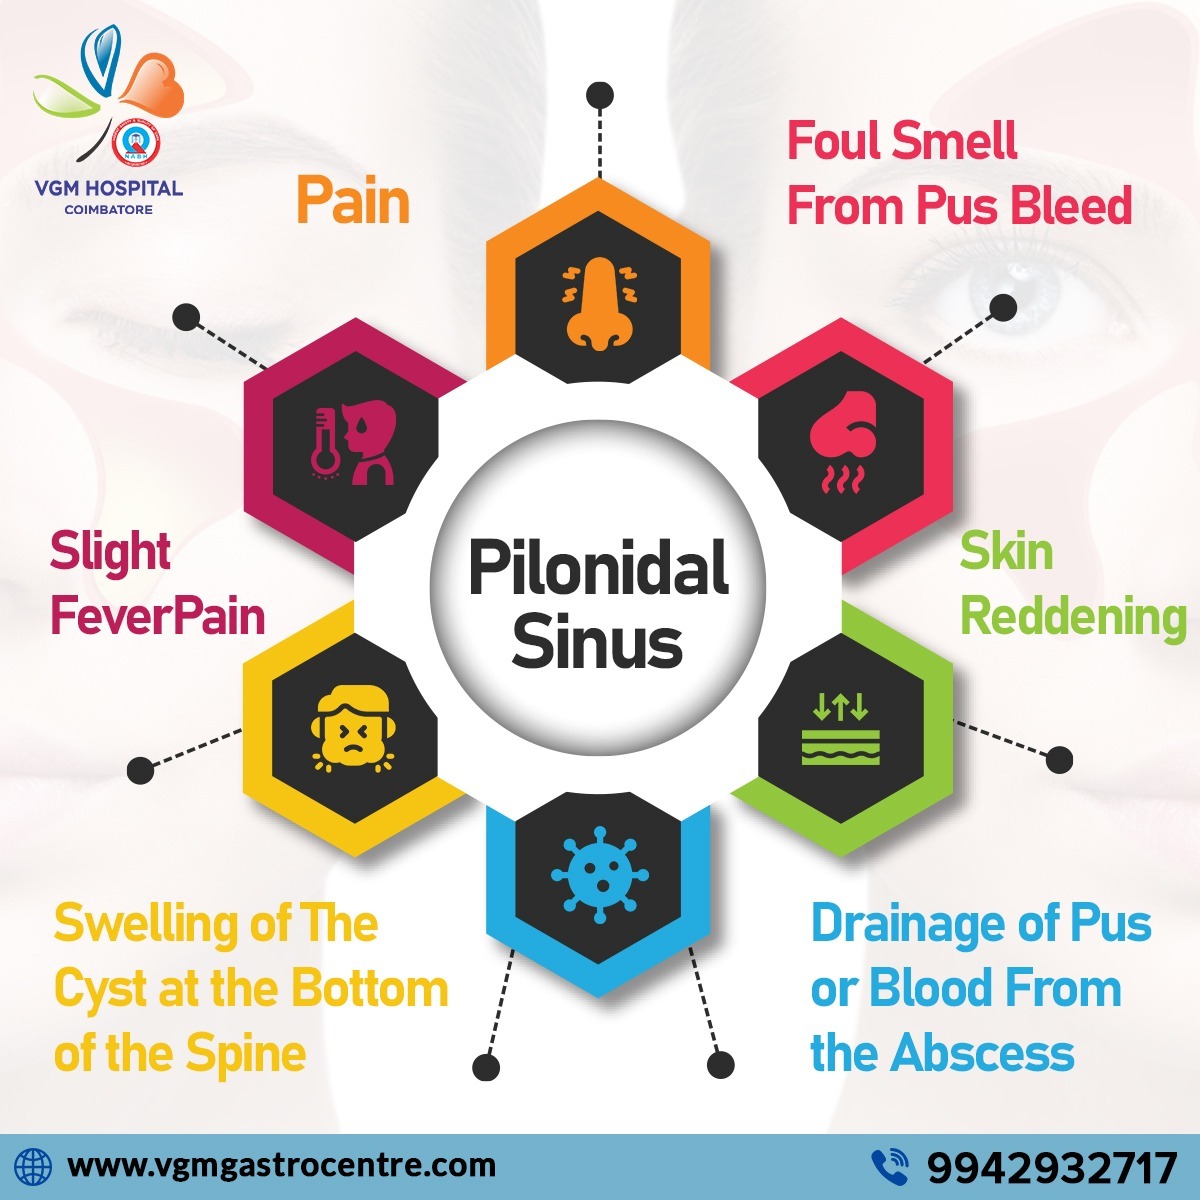 Pilonidal sinus commonly affects the area at the base of the spine. Timely medical intervention is crucial to prevent complications and promote healing. 

#VGMHospital #VGMGastroCentre #pilonidalsinus #pilonidalcyst #painmanagement #surgicaltreatment #skininfection